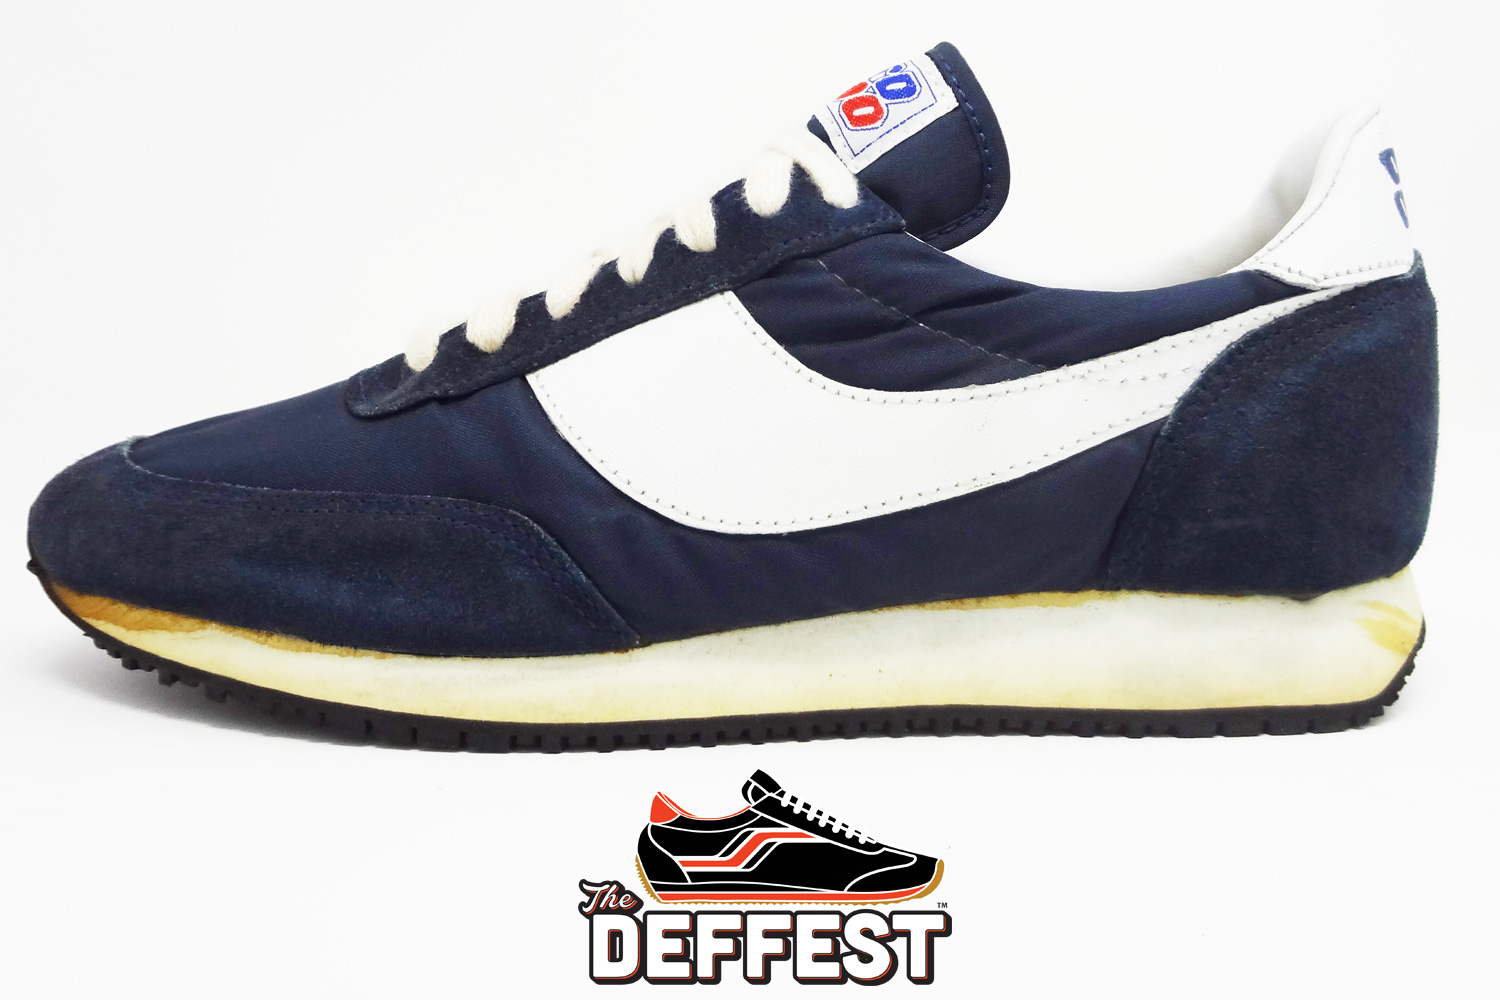 Obscure 1980s Pro 100 vintage sneakers @ The Deffest